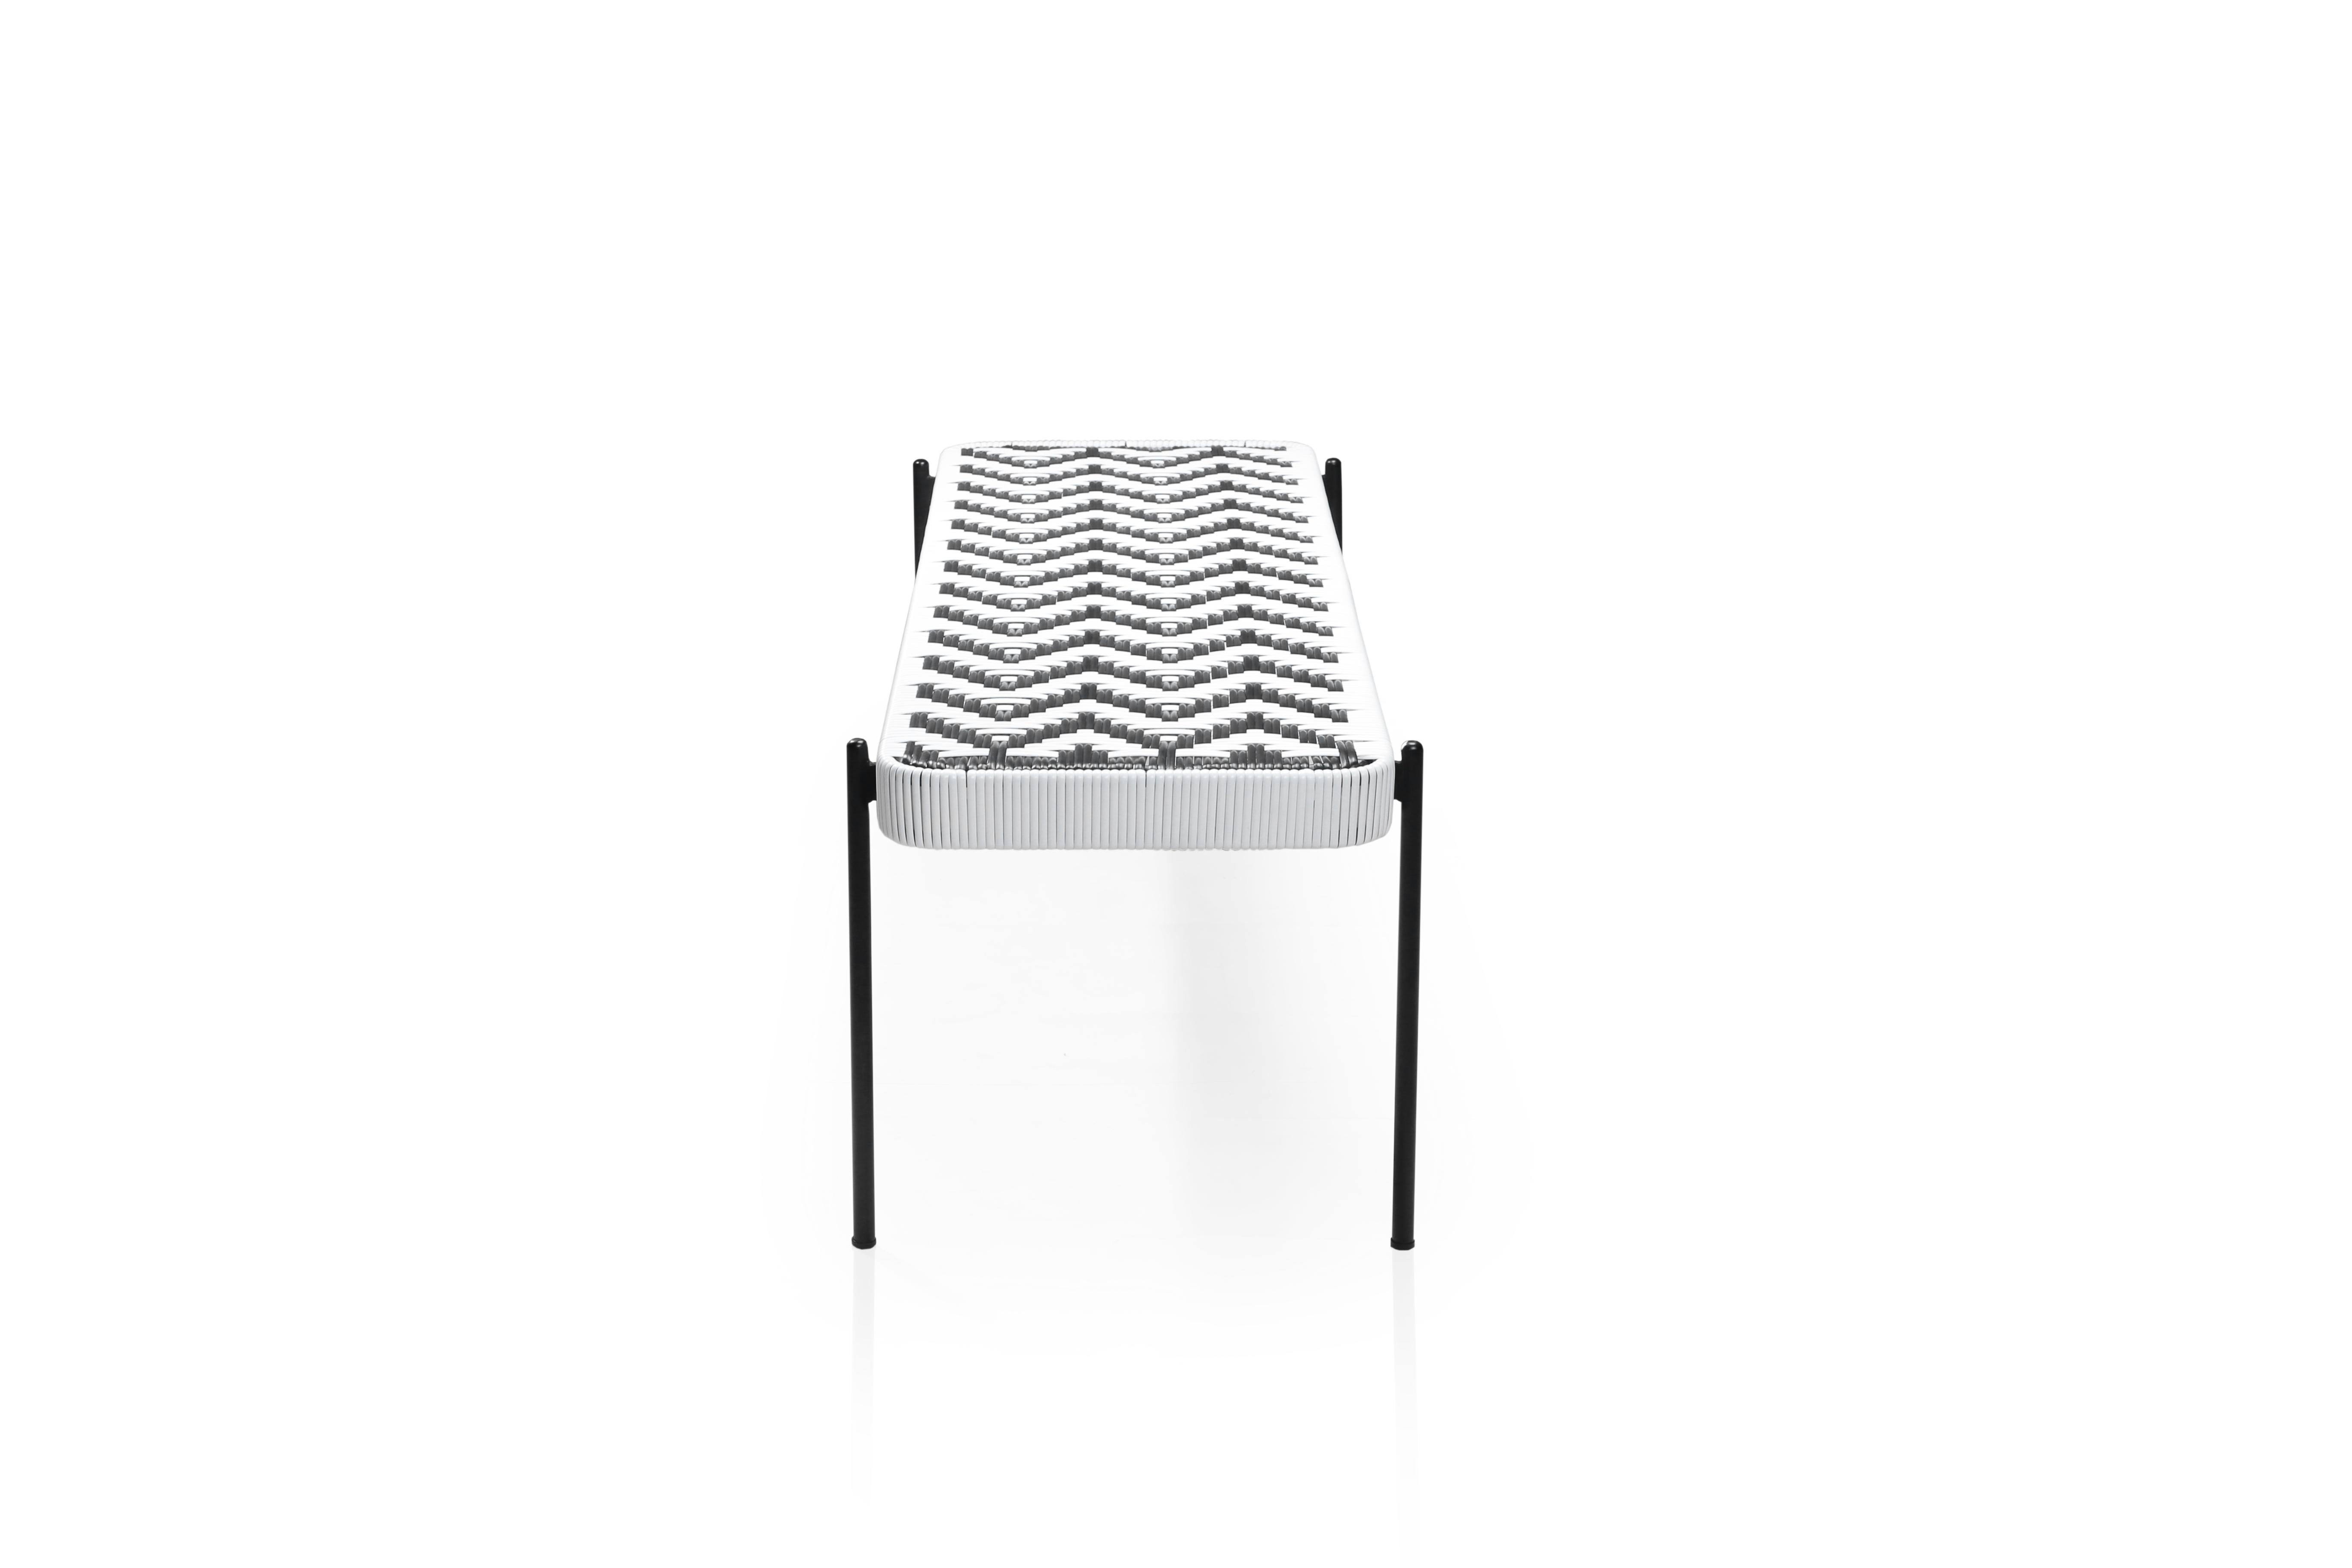 Woven Indoor Outdoor, Monochrome Bench Seat by Frida & Blu, Handwoven For Sale